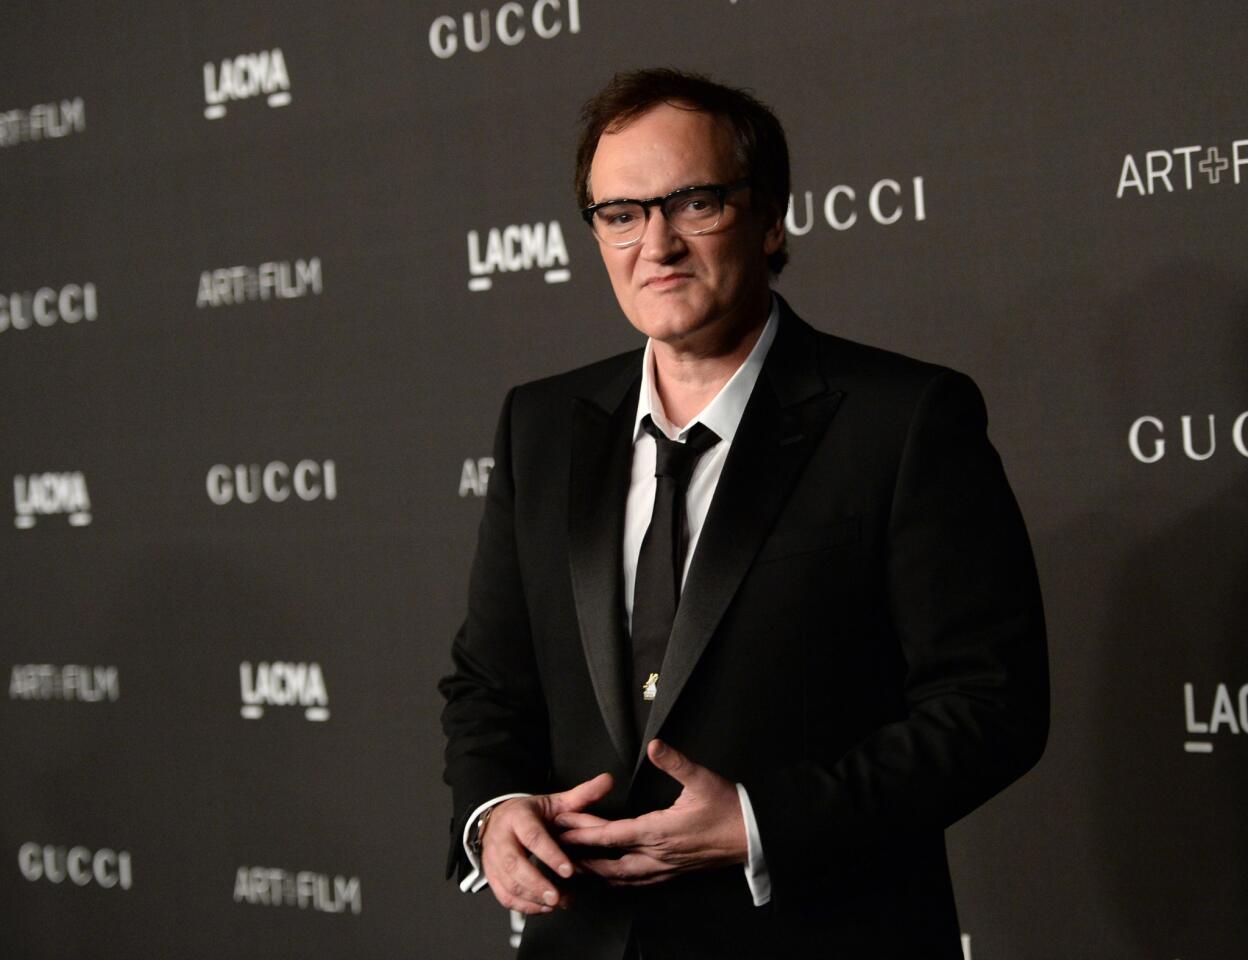 Filmmaker Quentin Tarantino at the 2014 LACMA Art + Film Gala in Los Angeles, which honored him and artist Barbara Kruger.